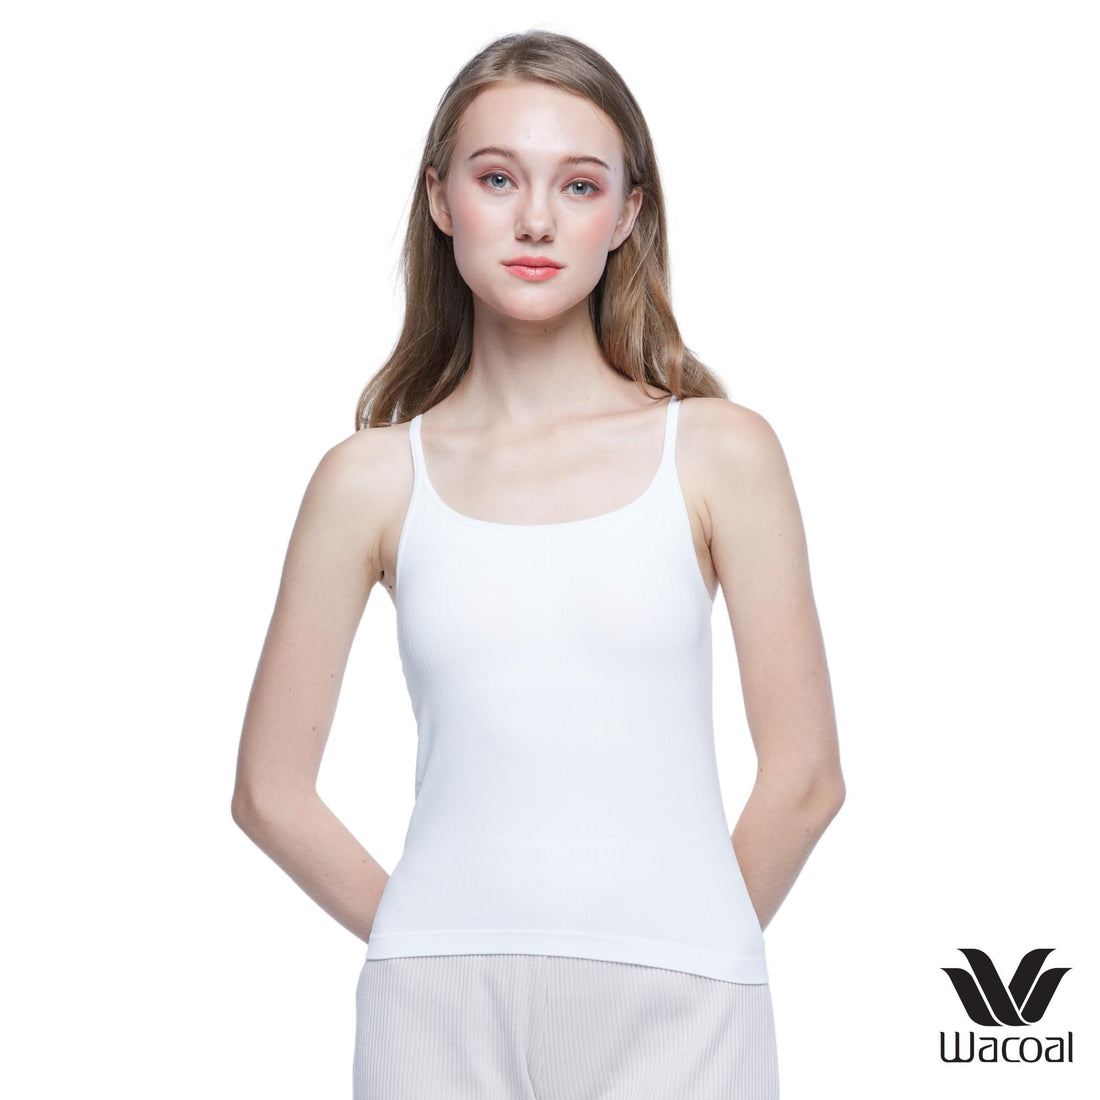 Wacoal Mood Comfy camisole with built-in bra Wacoal Mood Model WH4M04 White (WH)